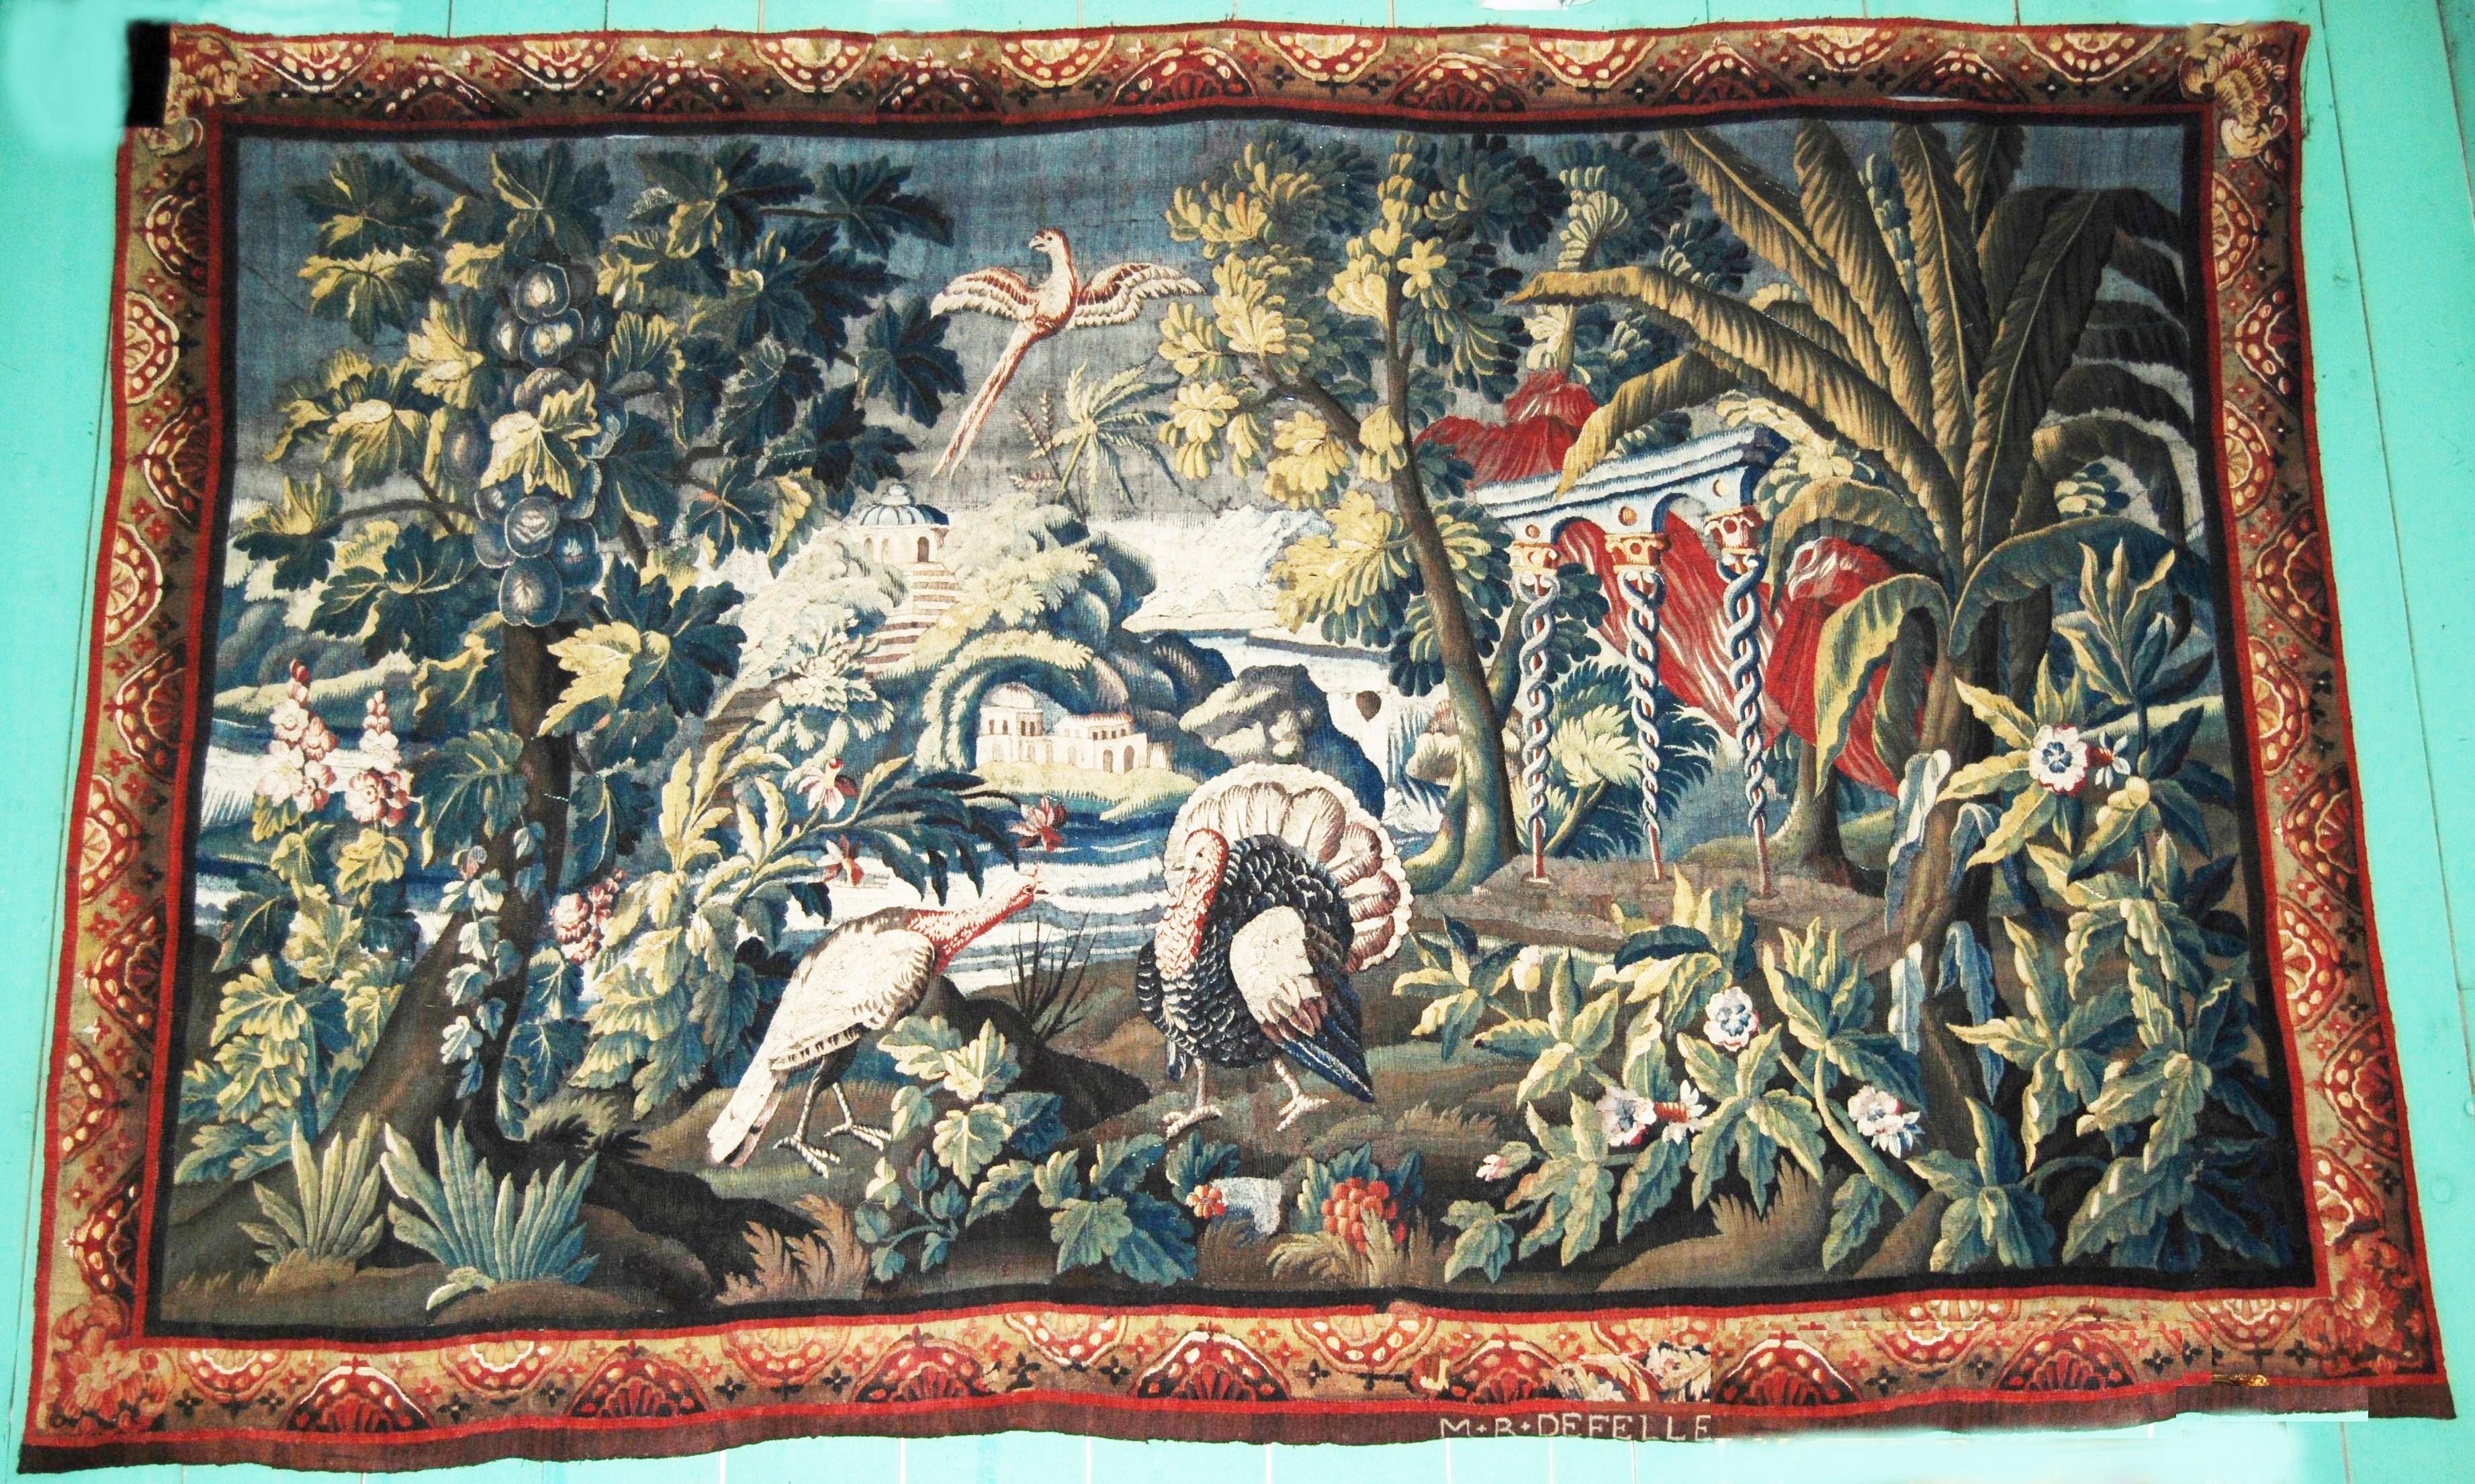 Hand-Crafted 17th Century Tapestry of The Americas Manufactured Royale De Felletin Antiques For Sale